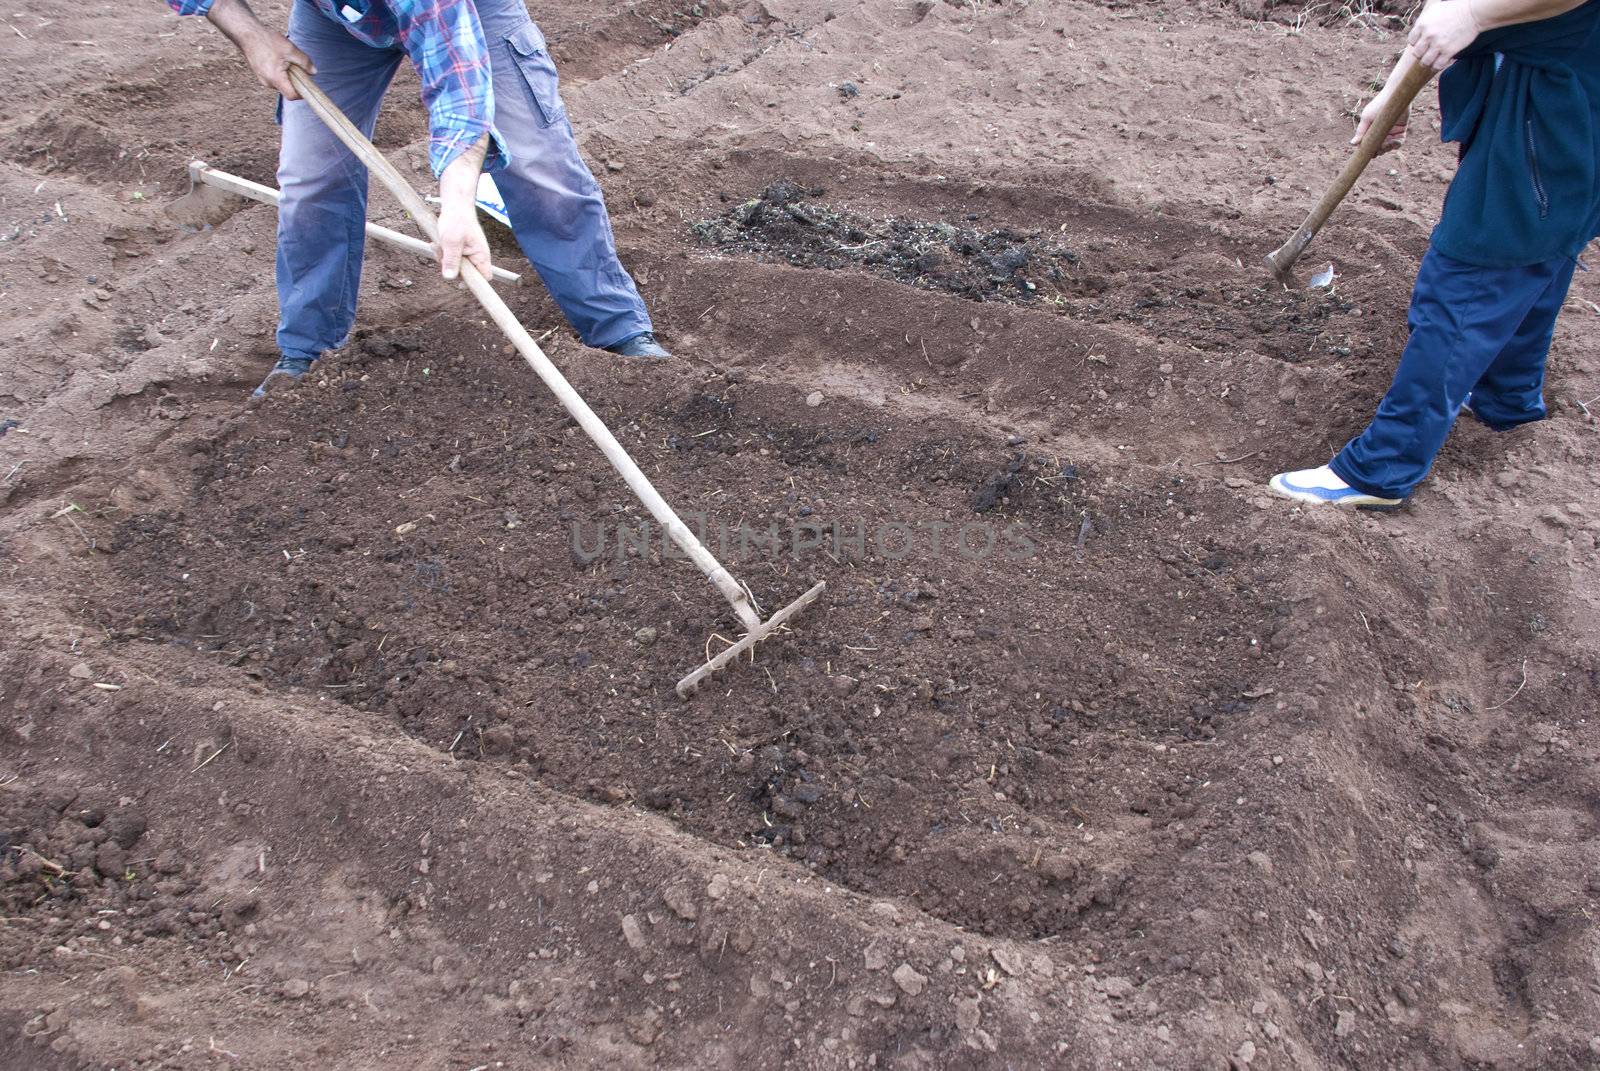 two workers preparing a soil for seeding